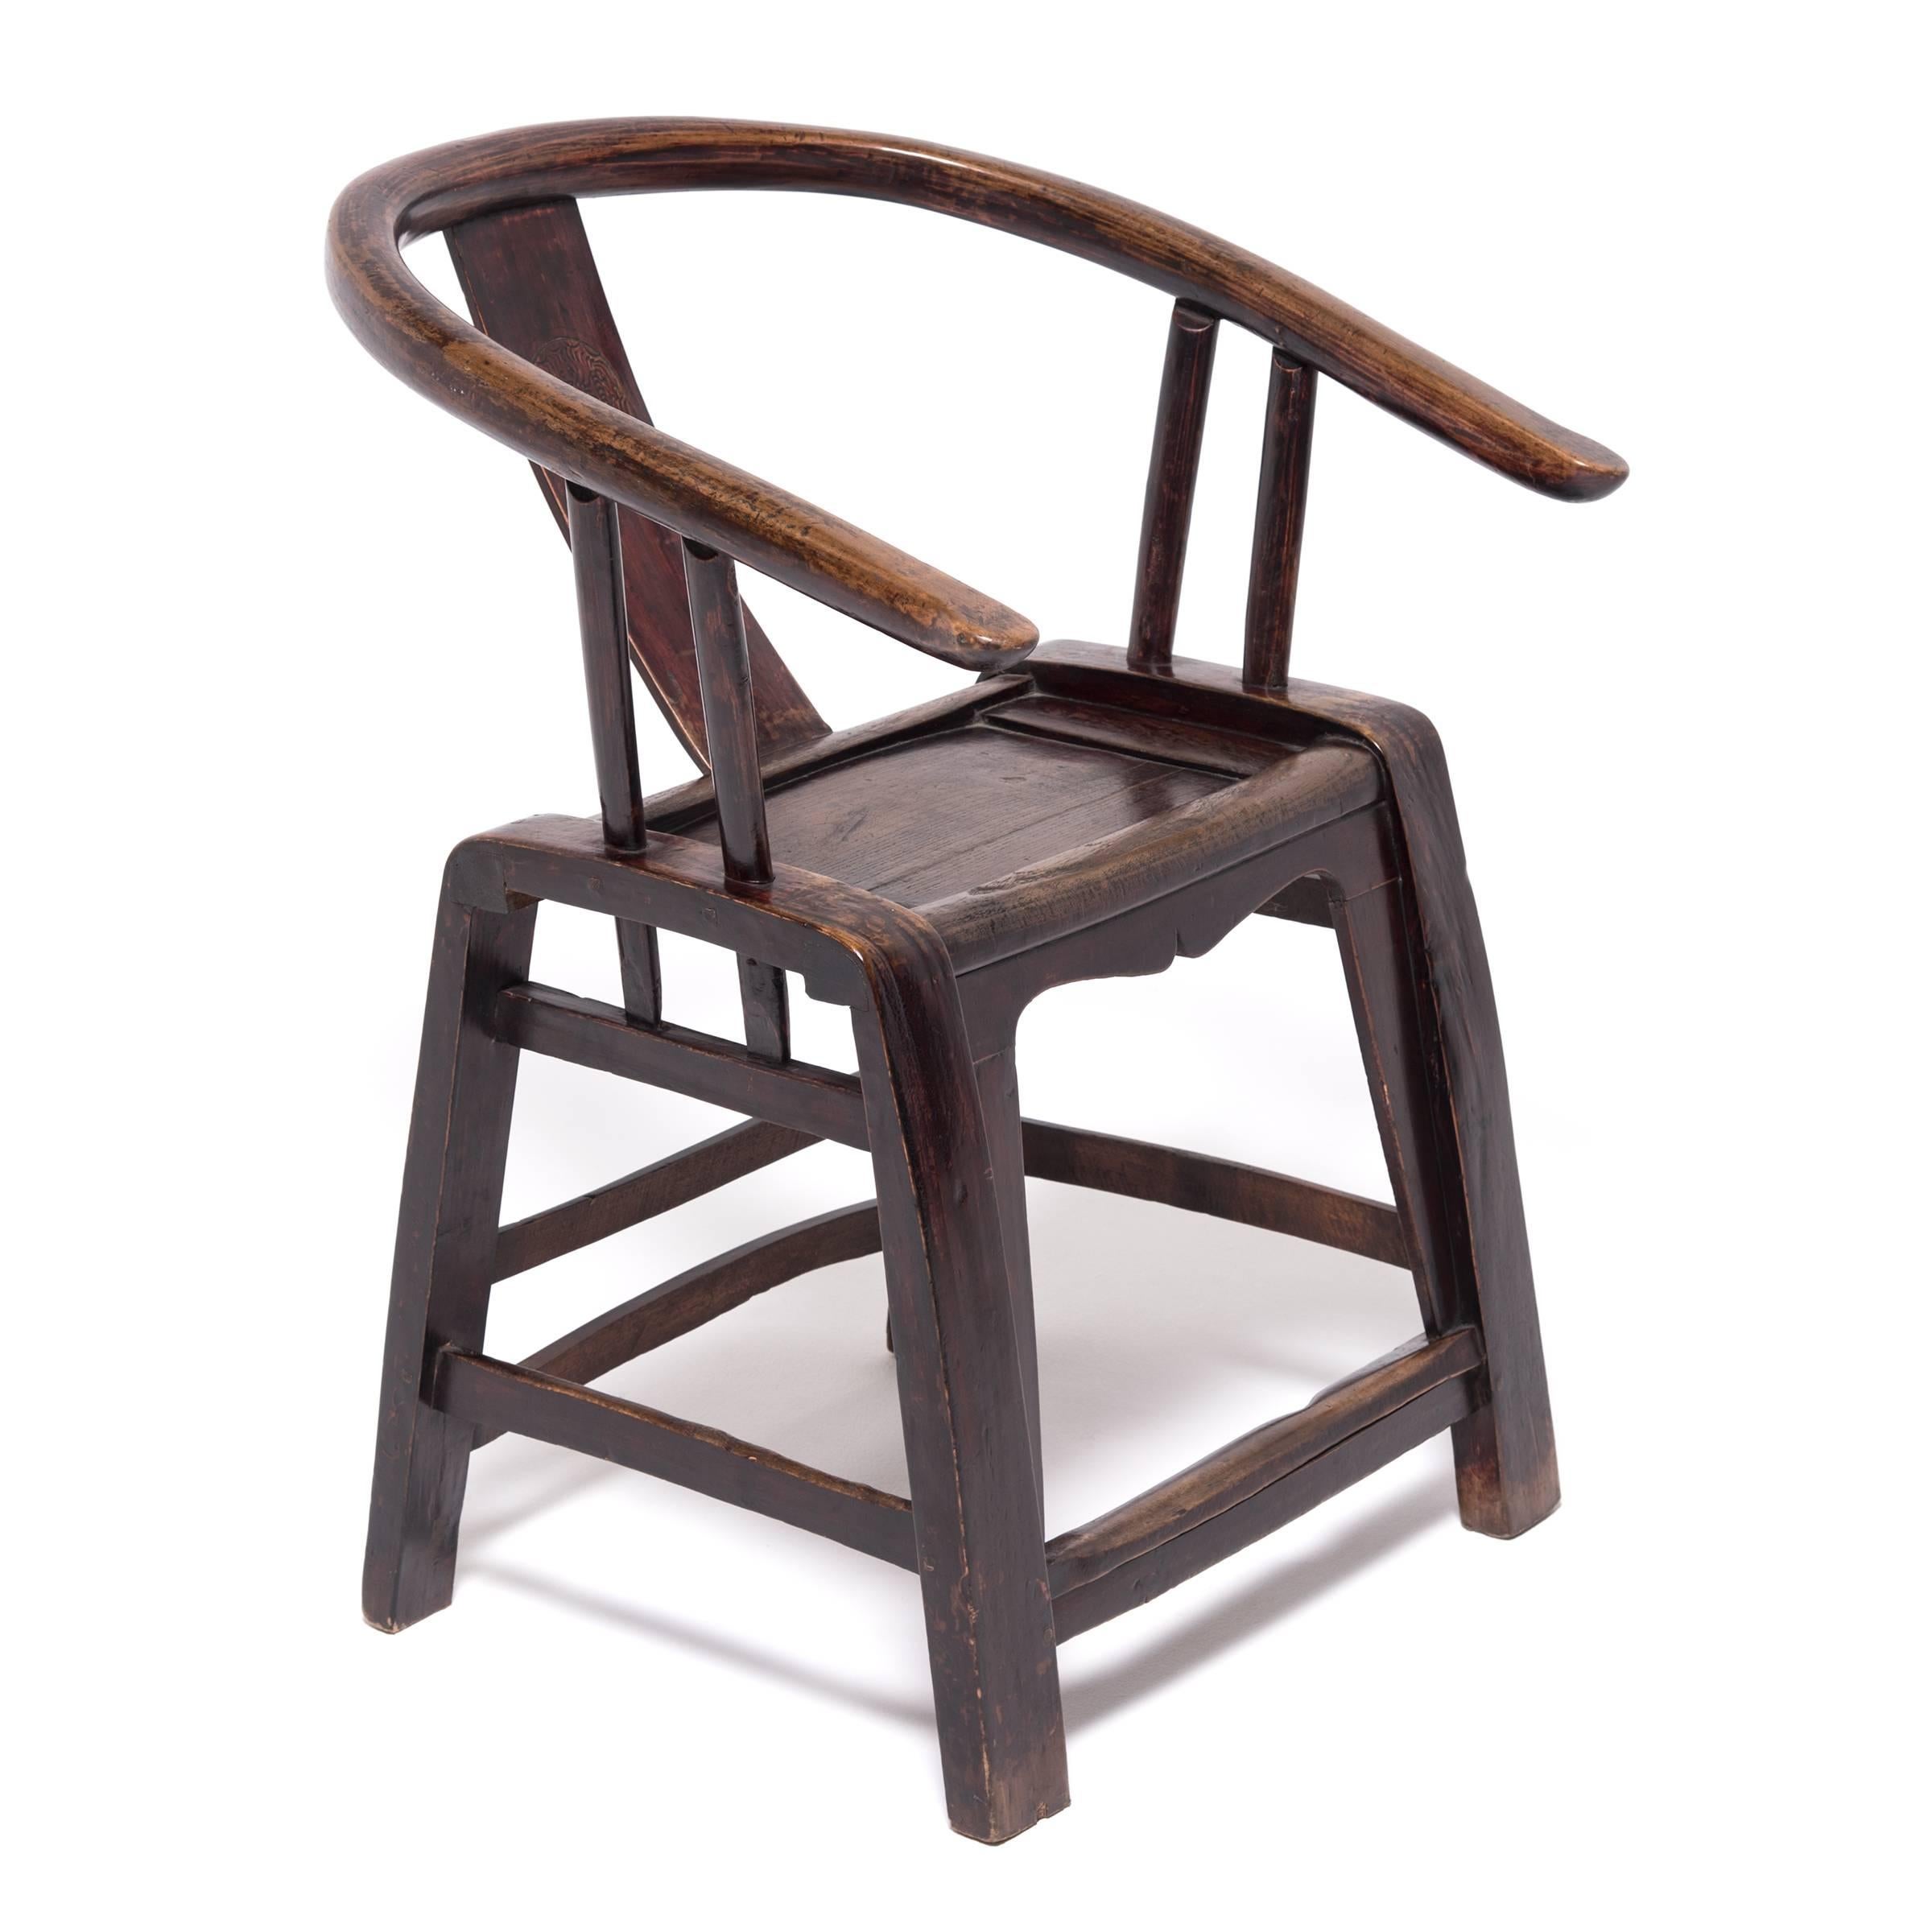 Prior to the 10th century Chinese society eschewed raised seats in favor of mats. The addition of chairs and other elevated forms of seating allowed craftsmen to adapt traditional cabinetry and architecture techniques to the human body. In the case